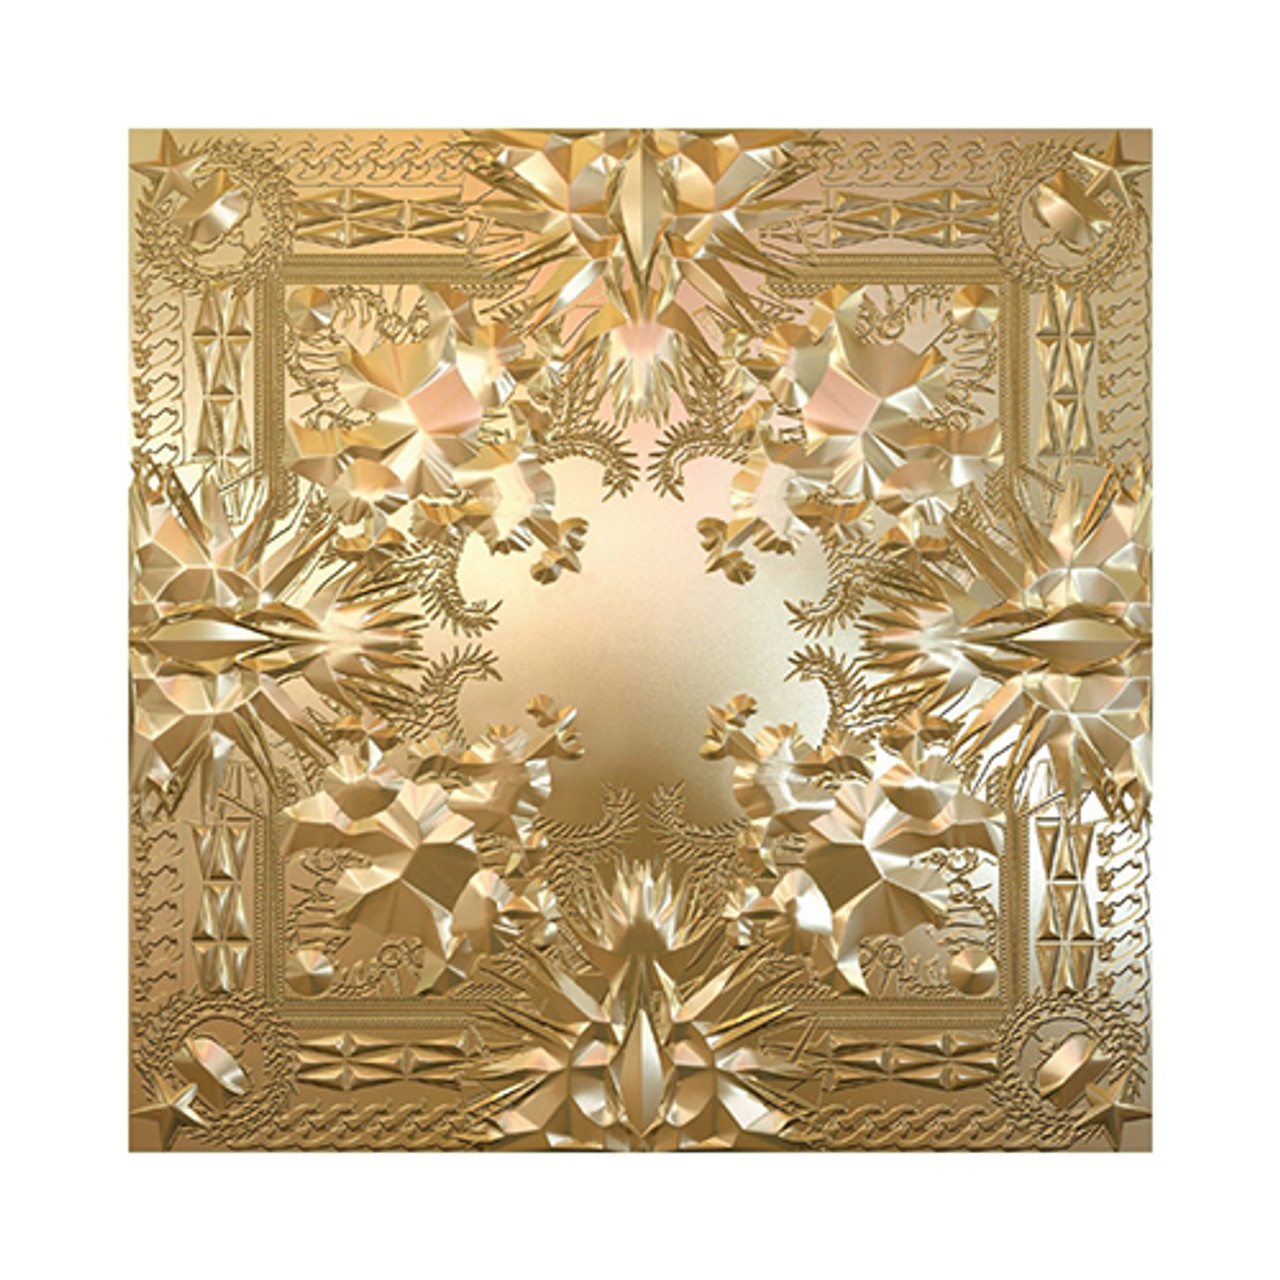 Jay-Z And Kanye West Watch The Throne (Vinyl Picture Disc - Music Direct